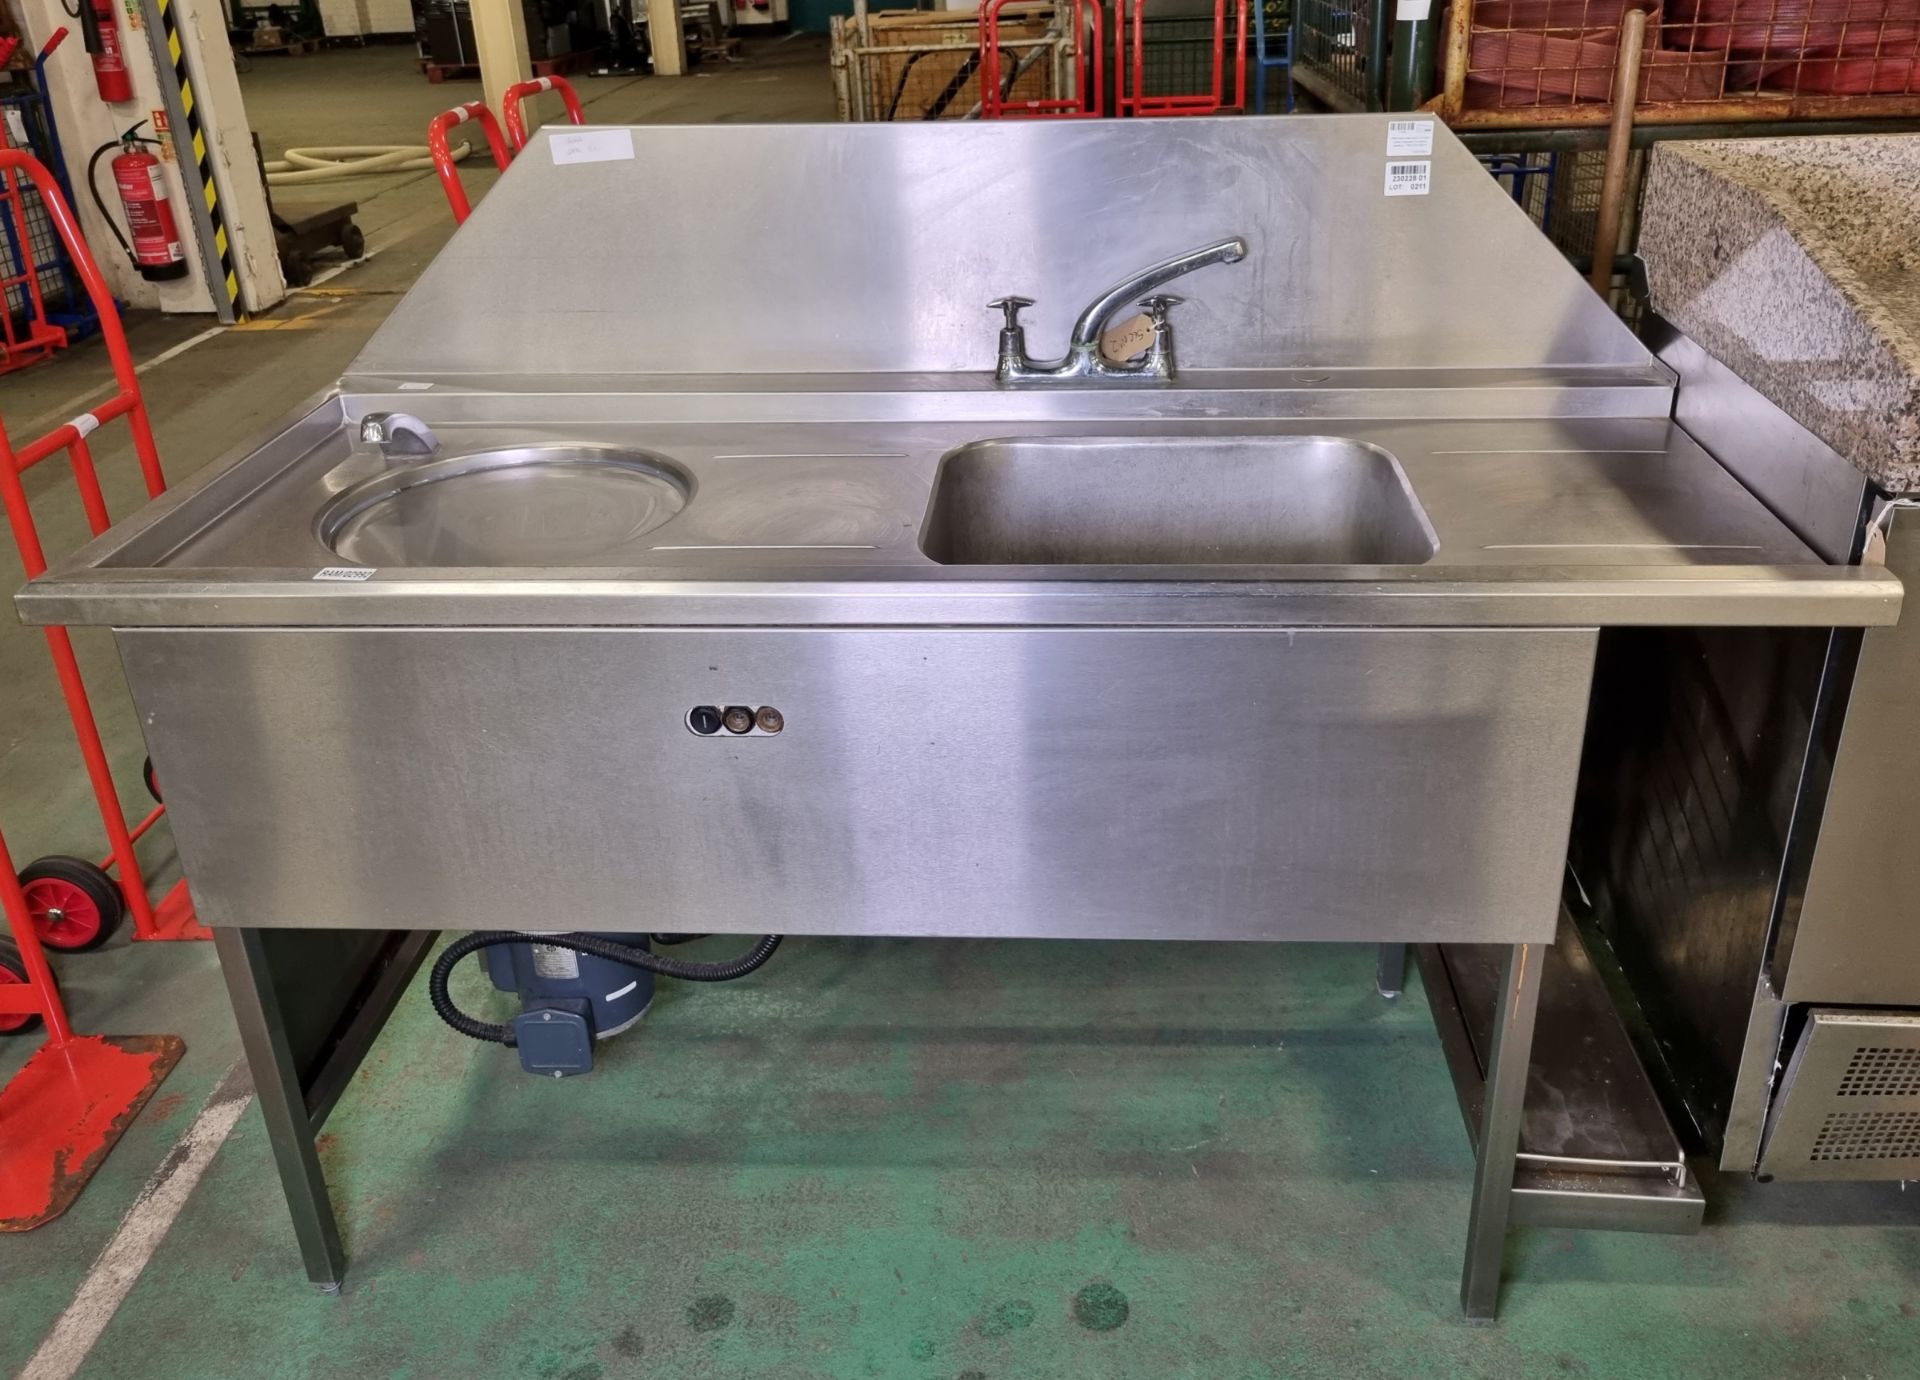 Stainless steel sink unit with waste disposal (currently sealed) - 165 x 70 x 120cm